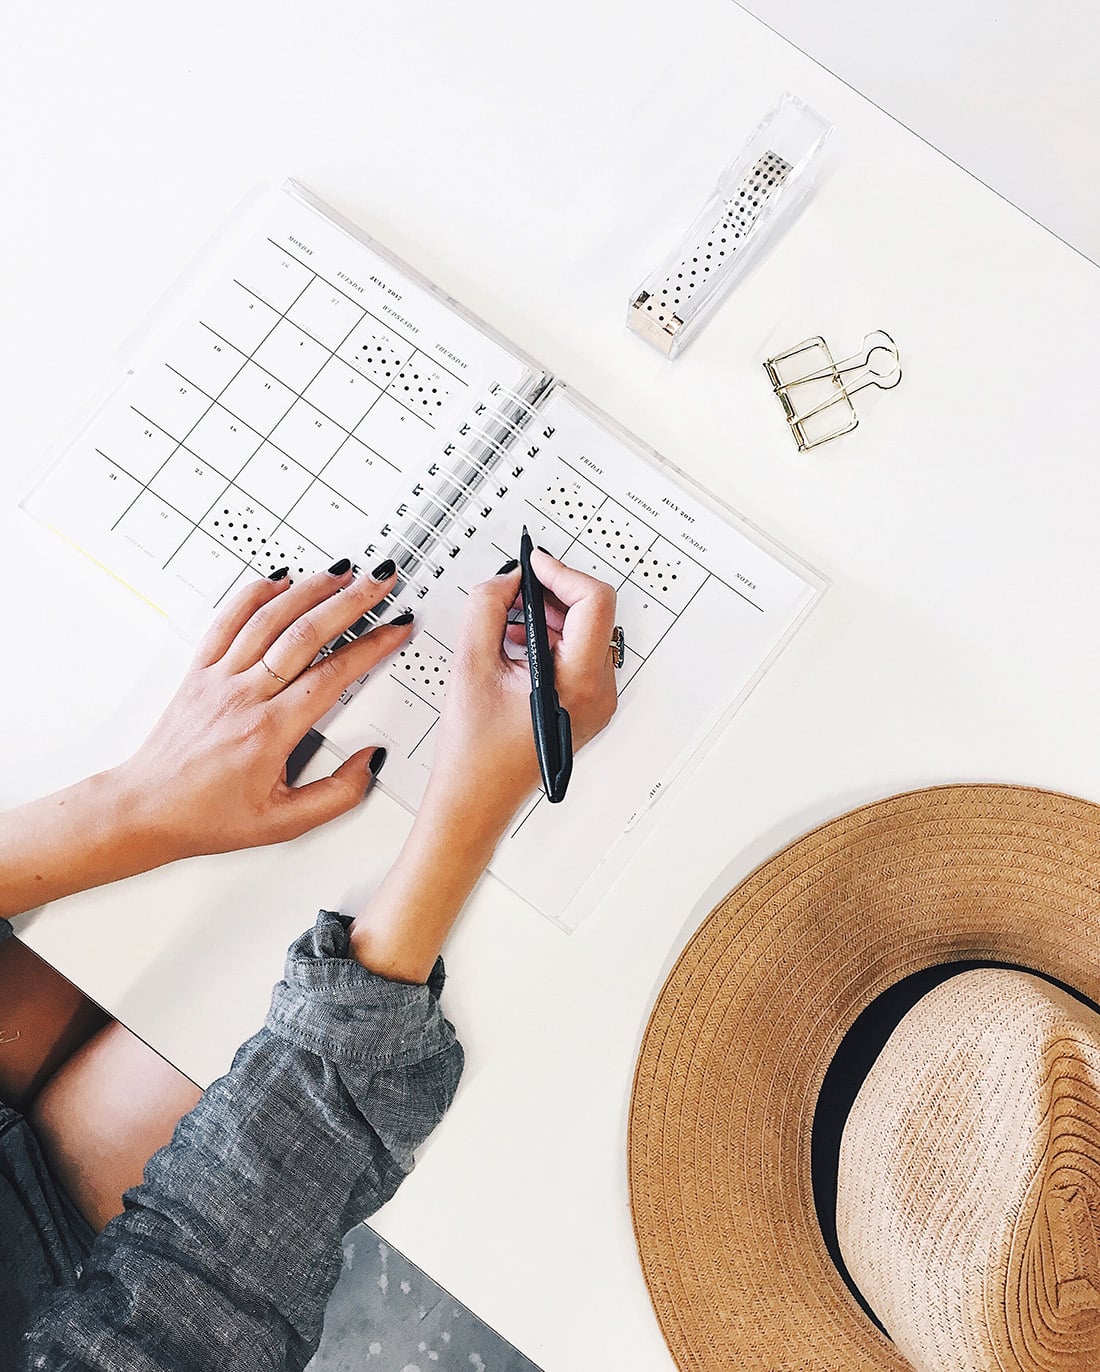 How to Set Goals That Bring Results • One Easy Trick That Will Change Your Life! • Little Gold Pixel #goals #goalgetter #goalsetter #goalsetting #goaldigger #smallbiz #femaleentrepreneur #mompreneur